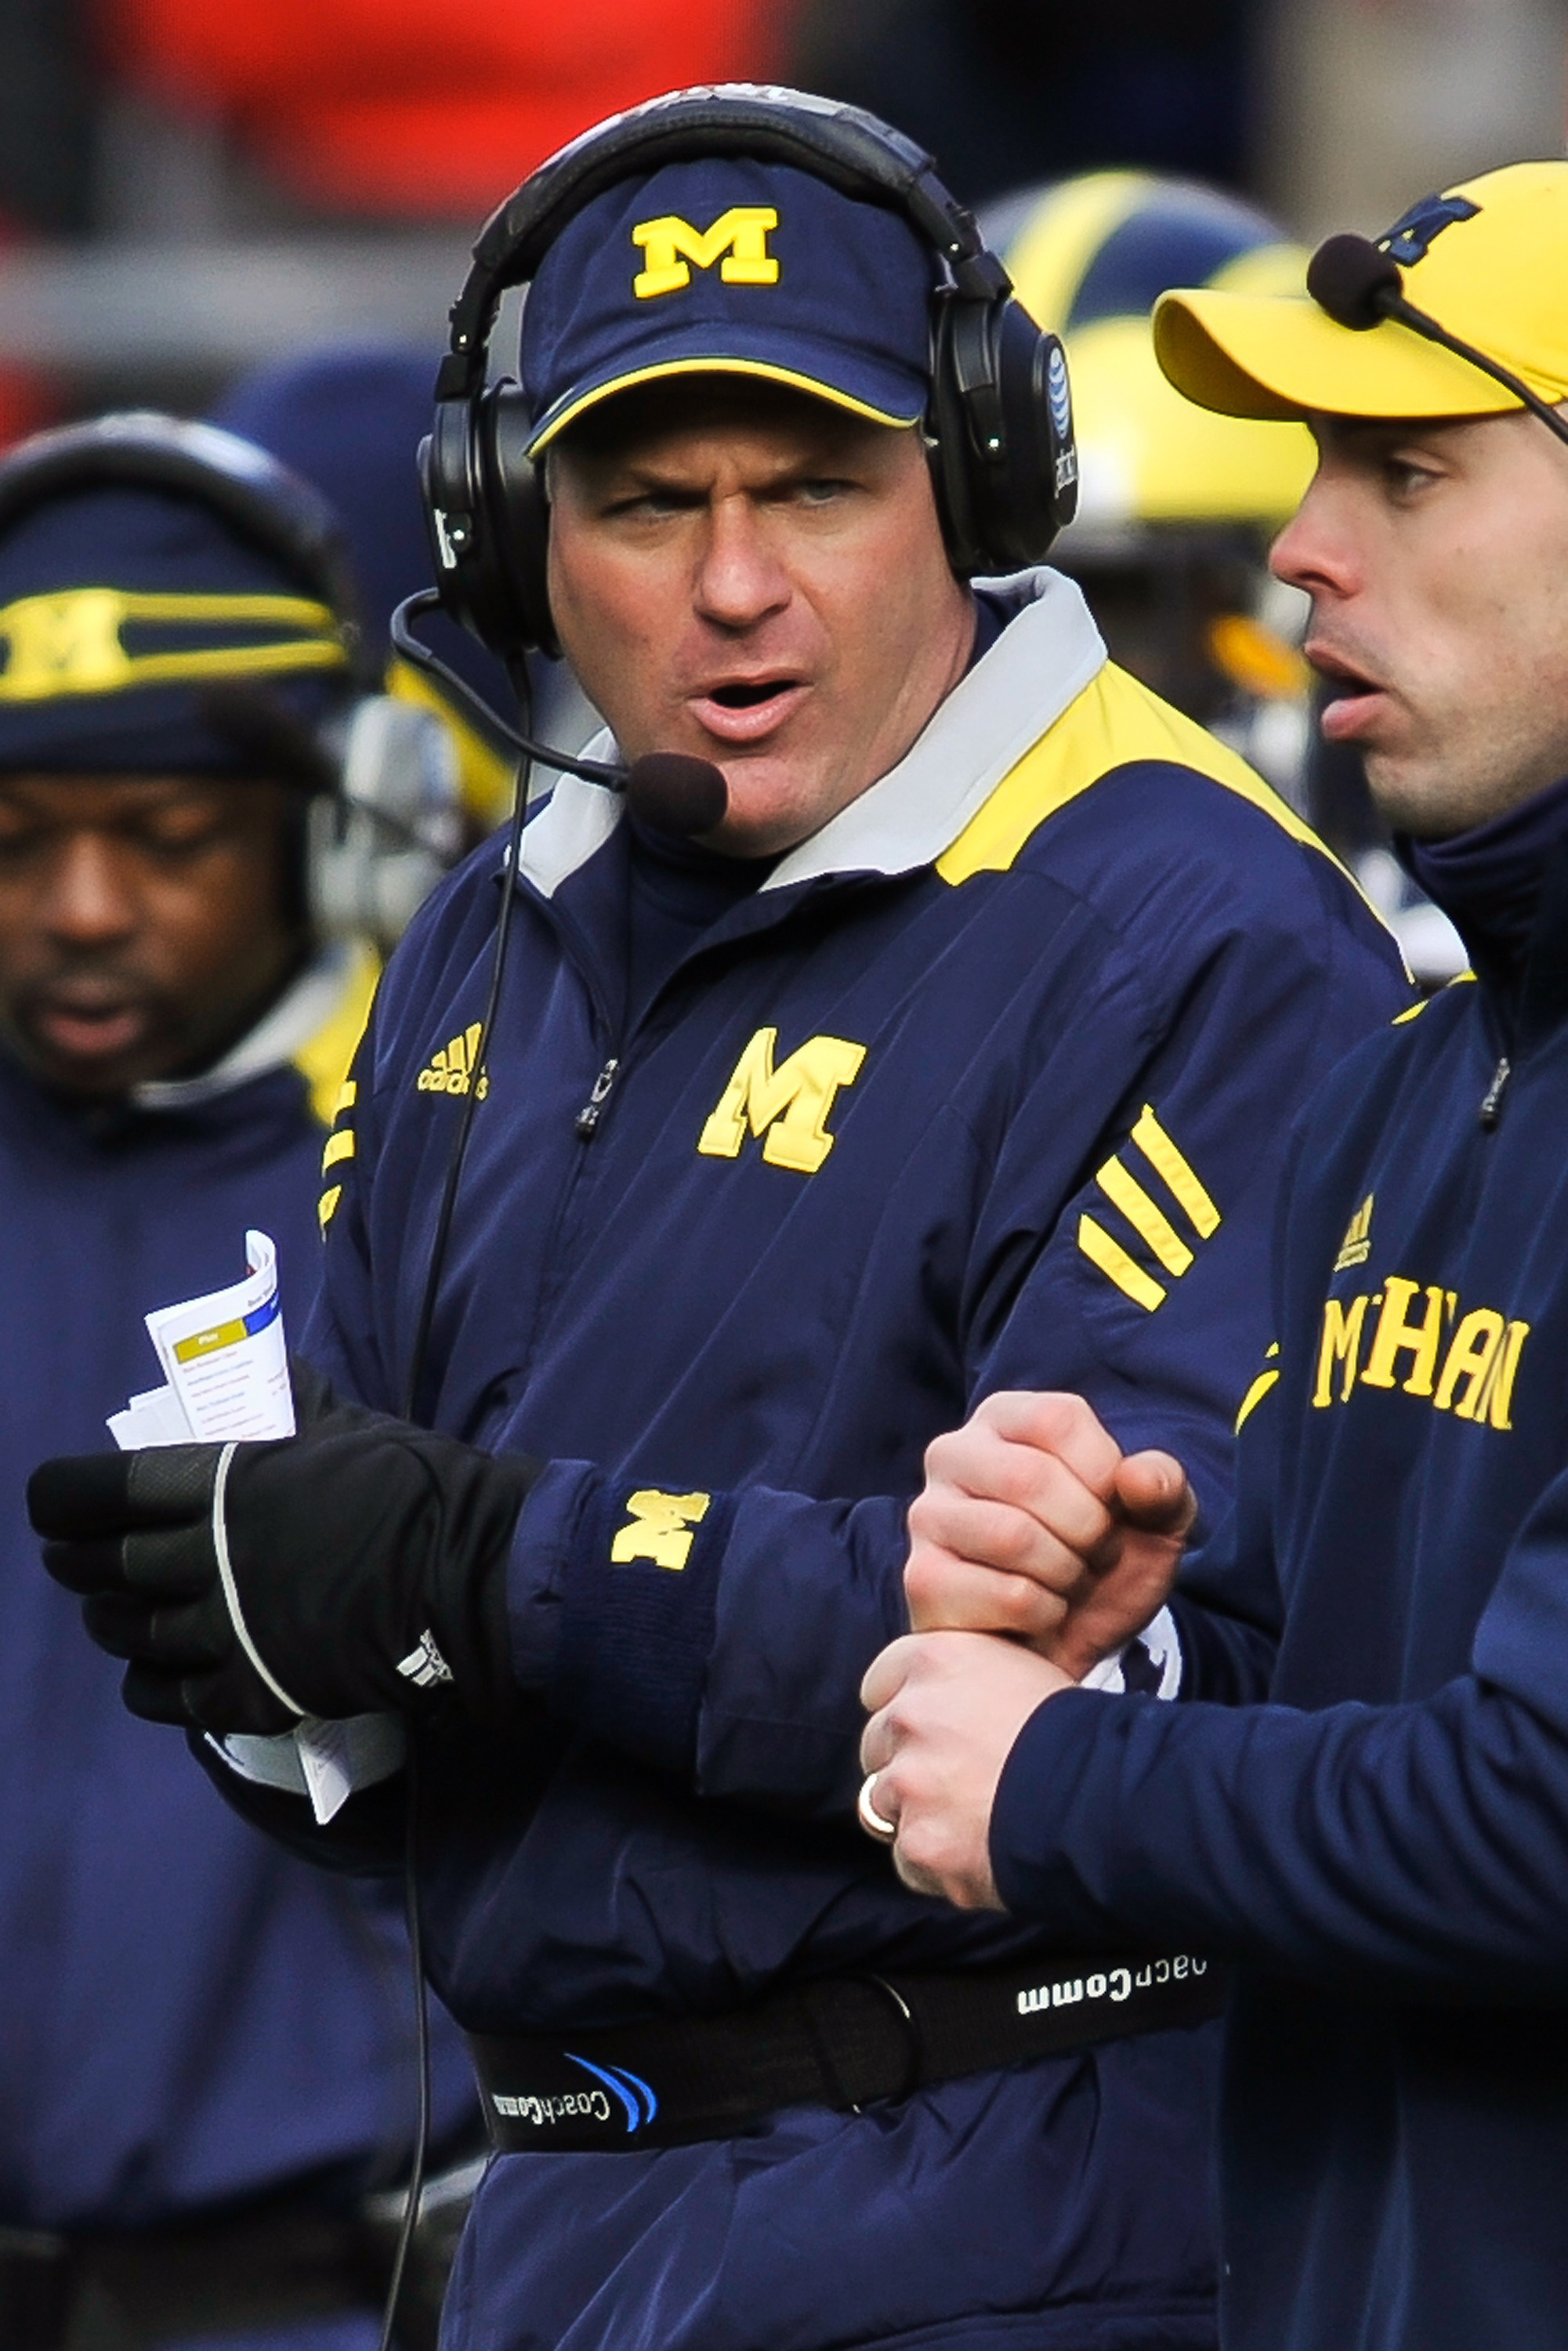 COLUMBUS, OH - NOVEMBER 27:  Head Coach Rich Rodriguez of the Michigan Wolverines watches one of his assistants send in a play against the Ohio State Buckeyes at Ohio Stadium on November 27, 2010 in Columbus, Ohio.  (Photo by Jamie Sabau/Getty Images)